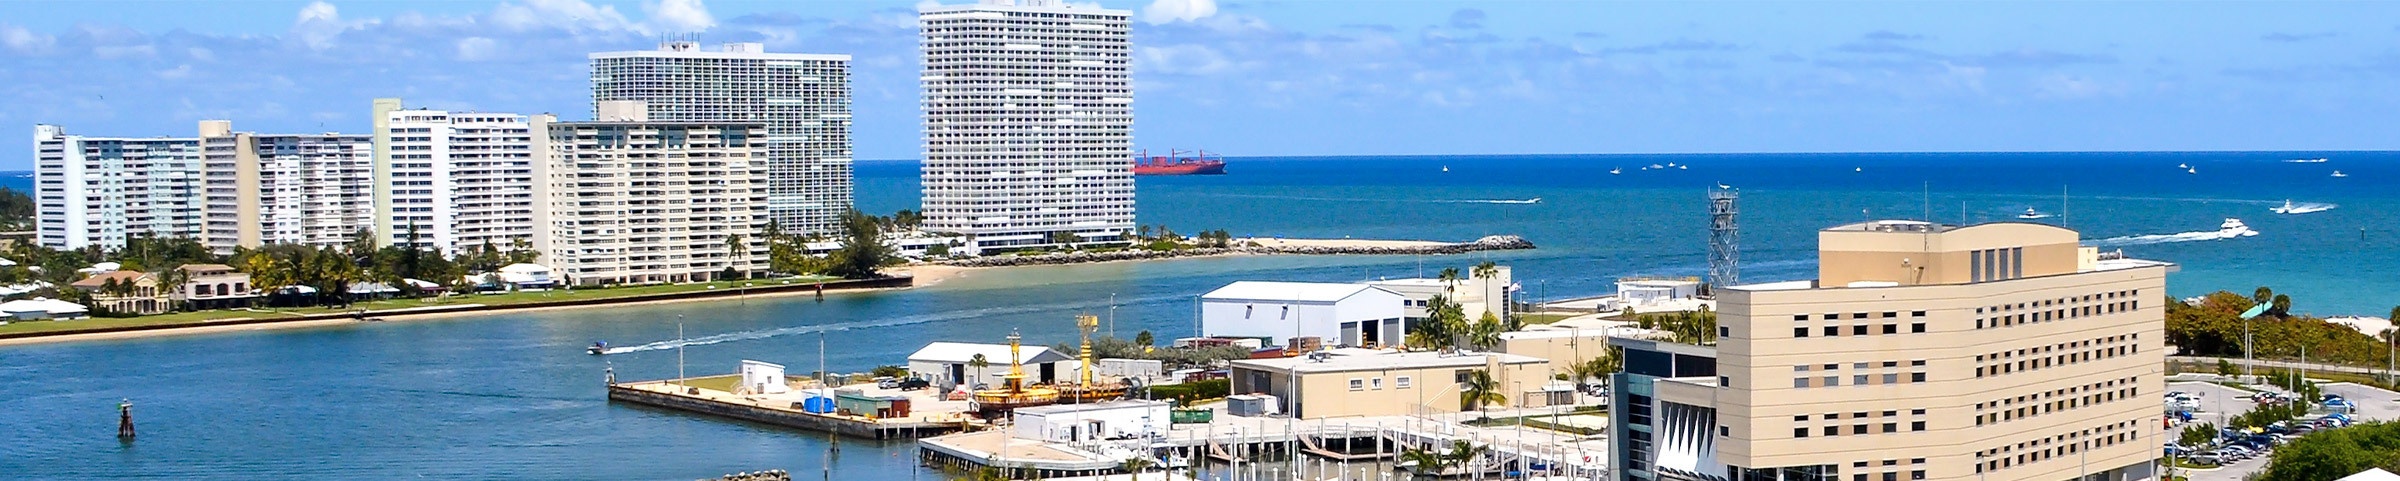 Photo of Fort Lauderdale